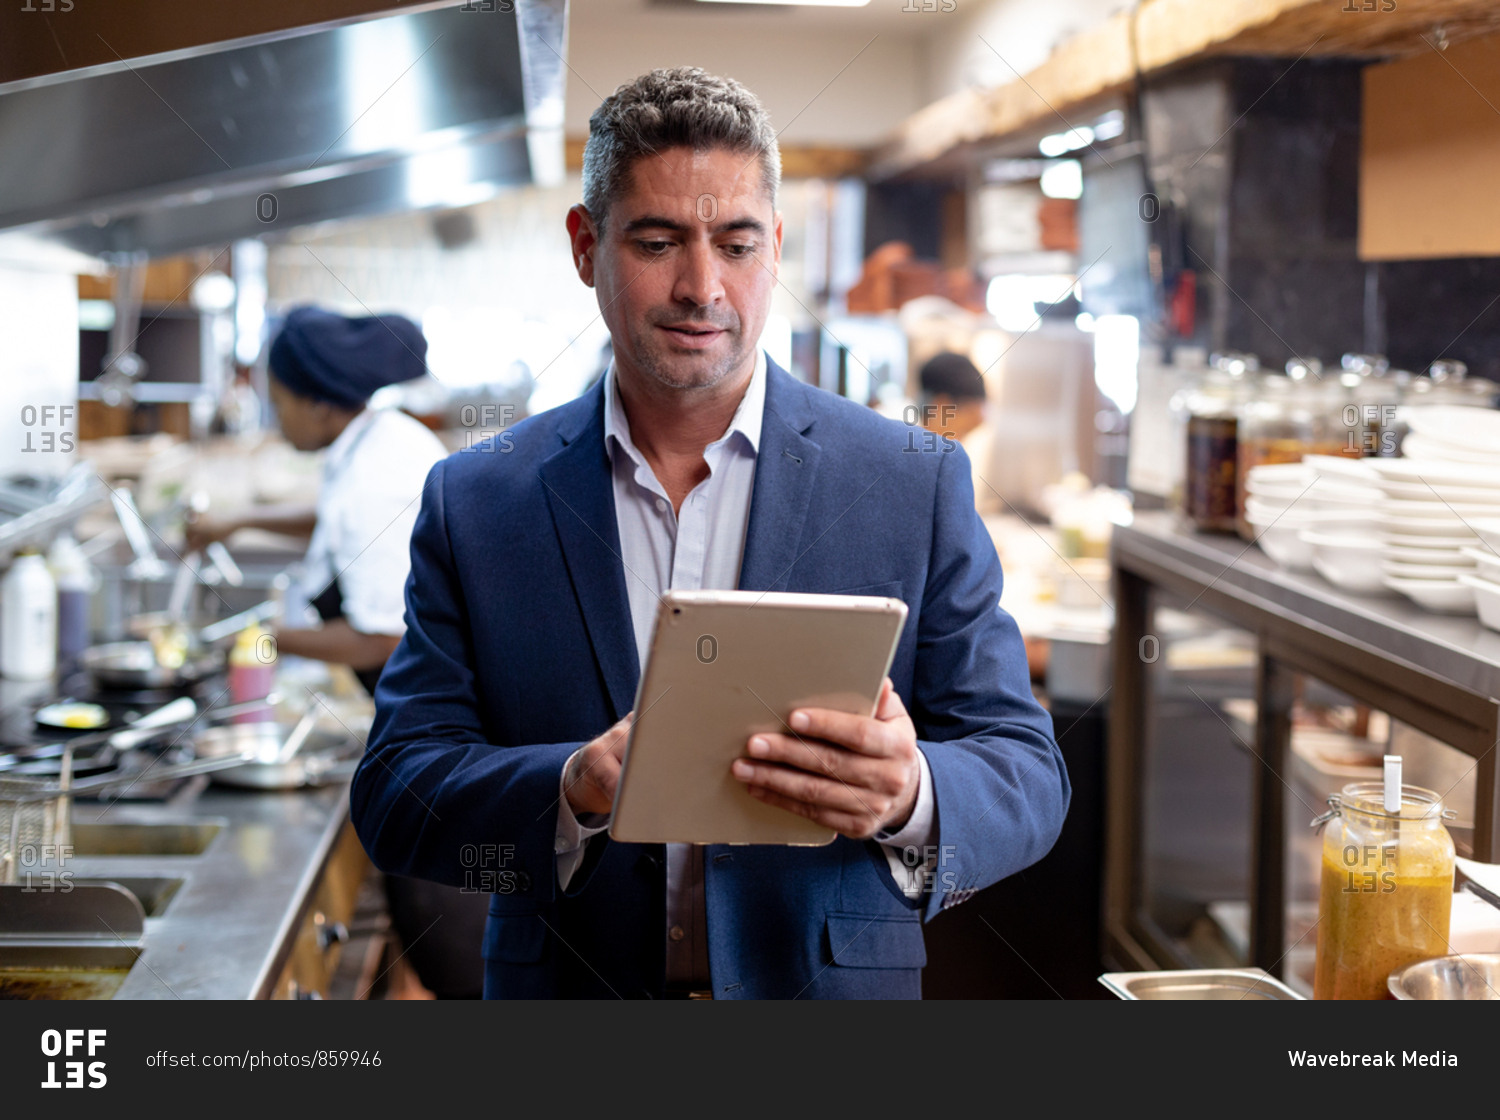 Front view close up of a middle aged Caucasian male restaurant manager using a tablet computer in a busy restaurant kitchen, while kitchen staff work in the background